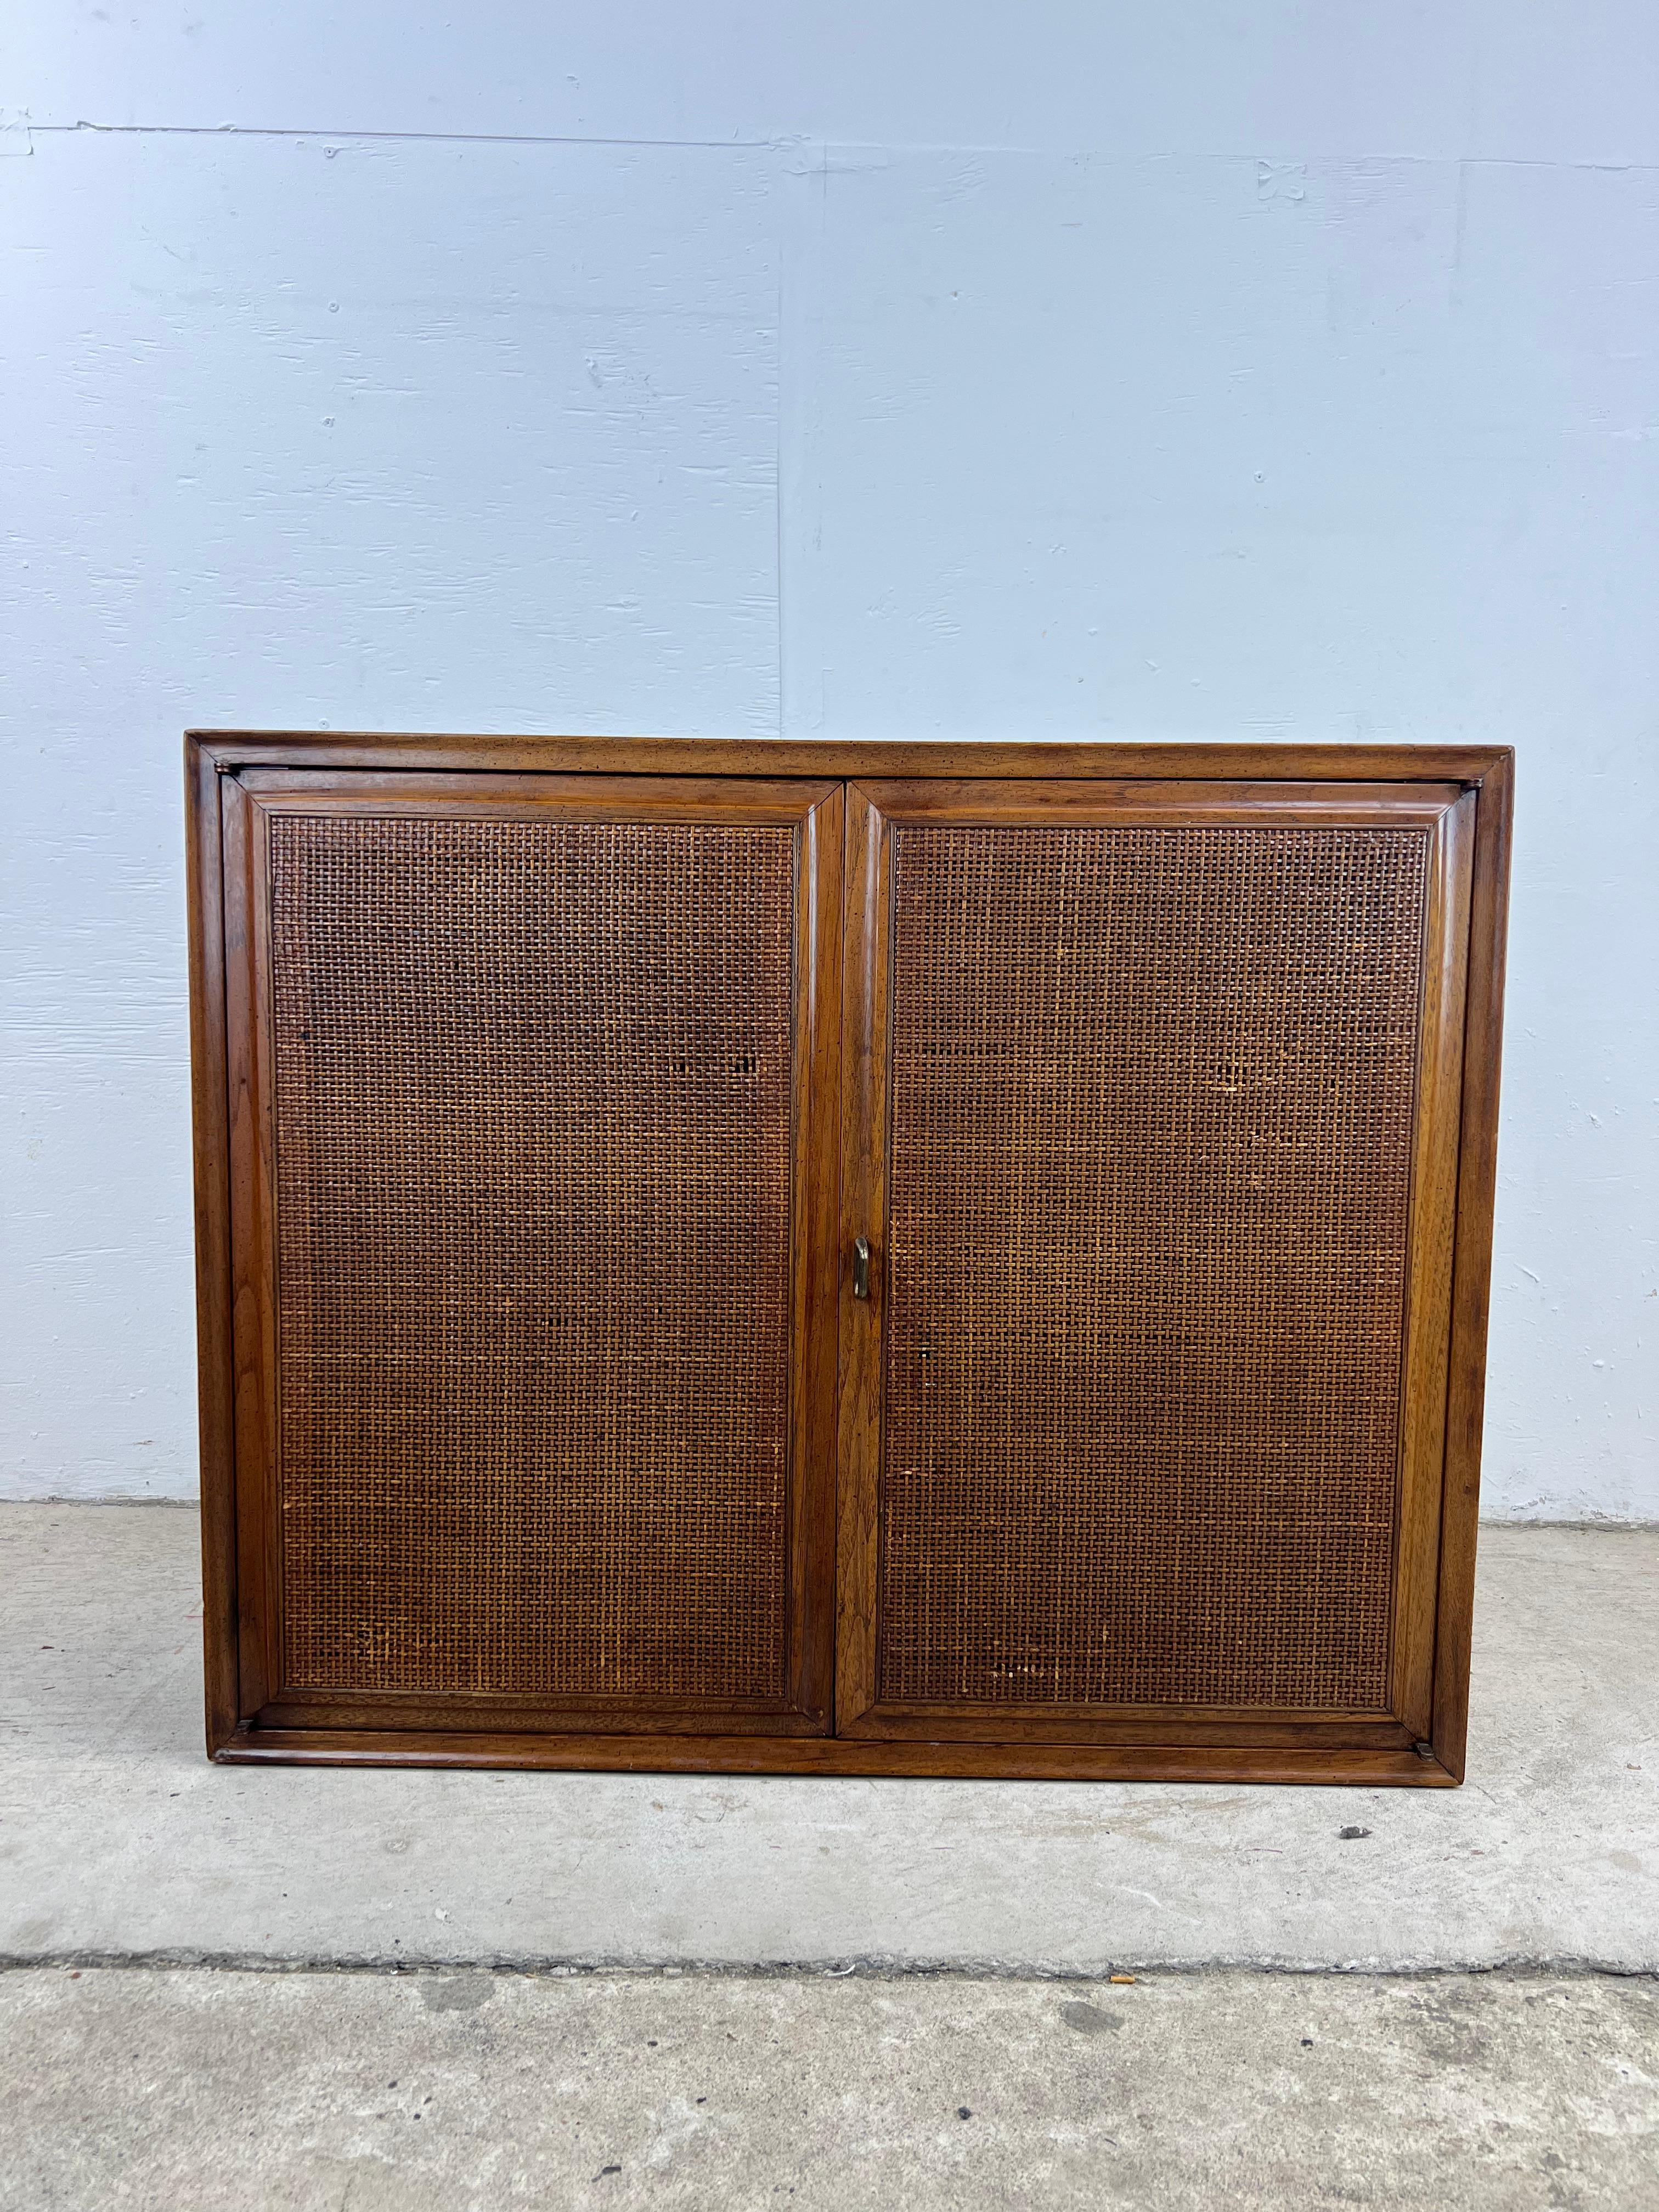 This mid century modern two door cabinet features pressed wood construction, walnut veneer with original finish, two cabinet doors with caned front, interior adjustable shelf, and brass accented hardware.

This cabinet appears to be by Jack